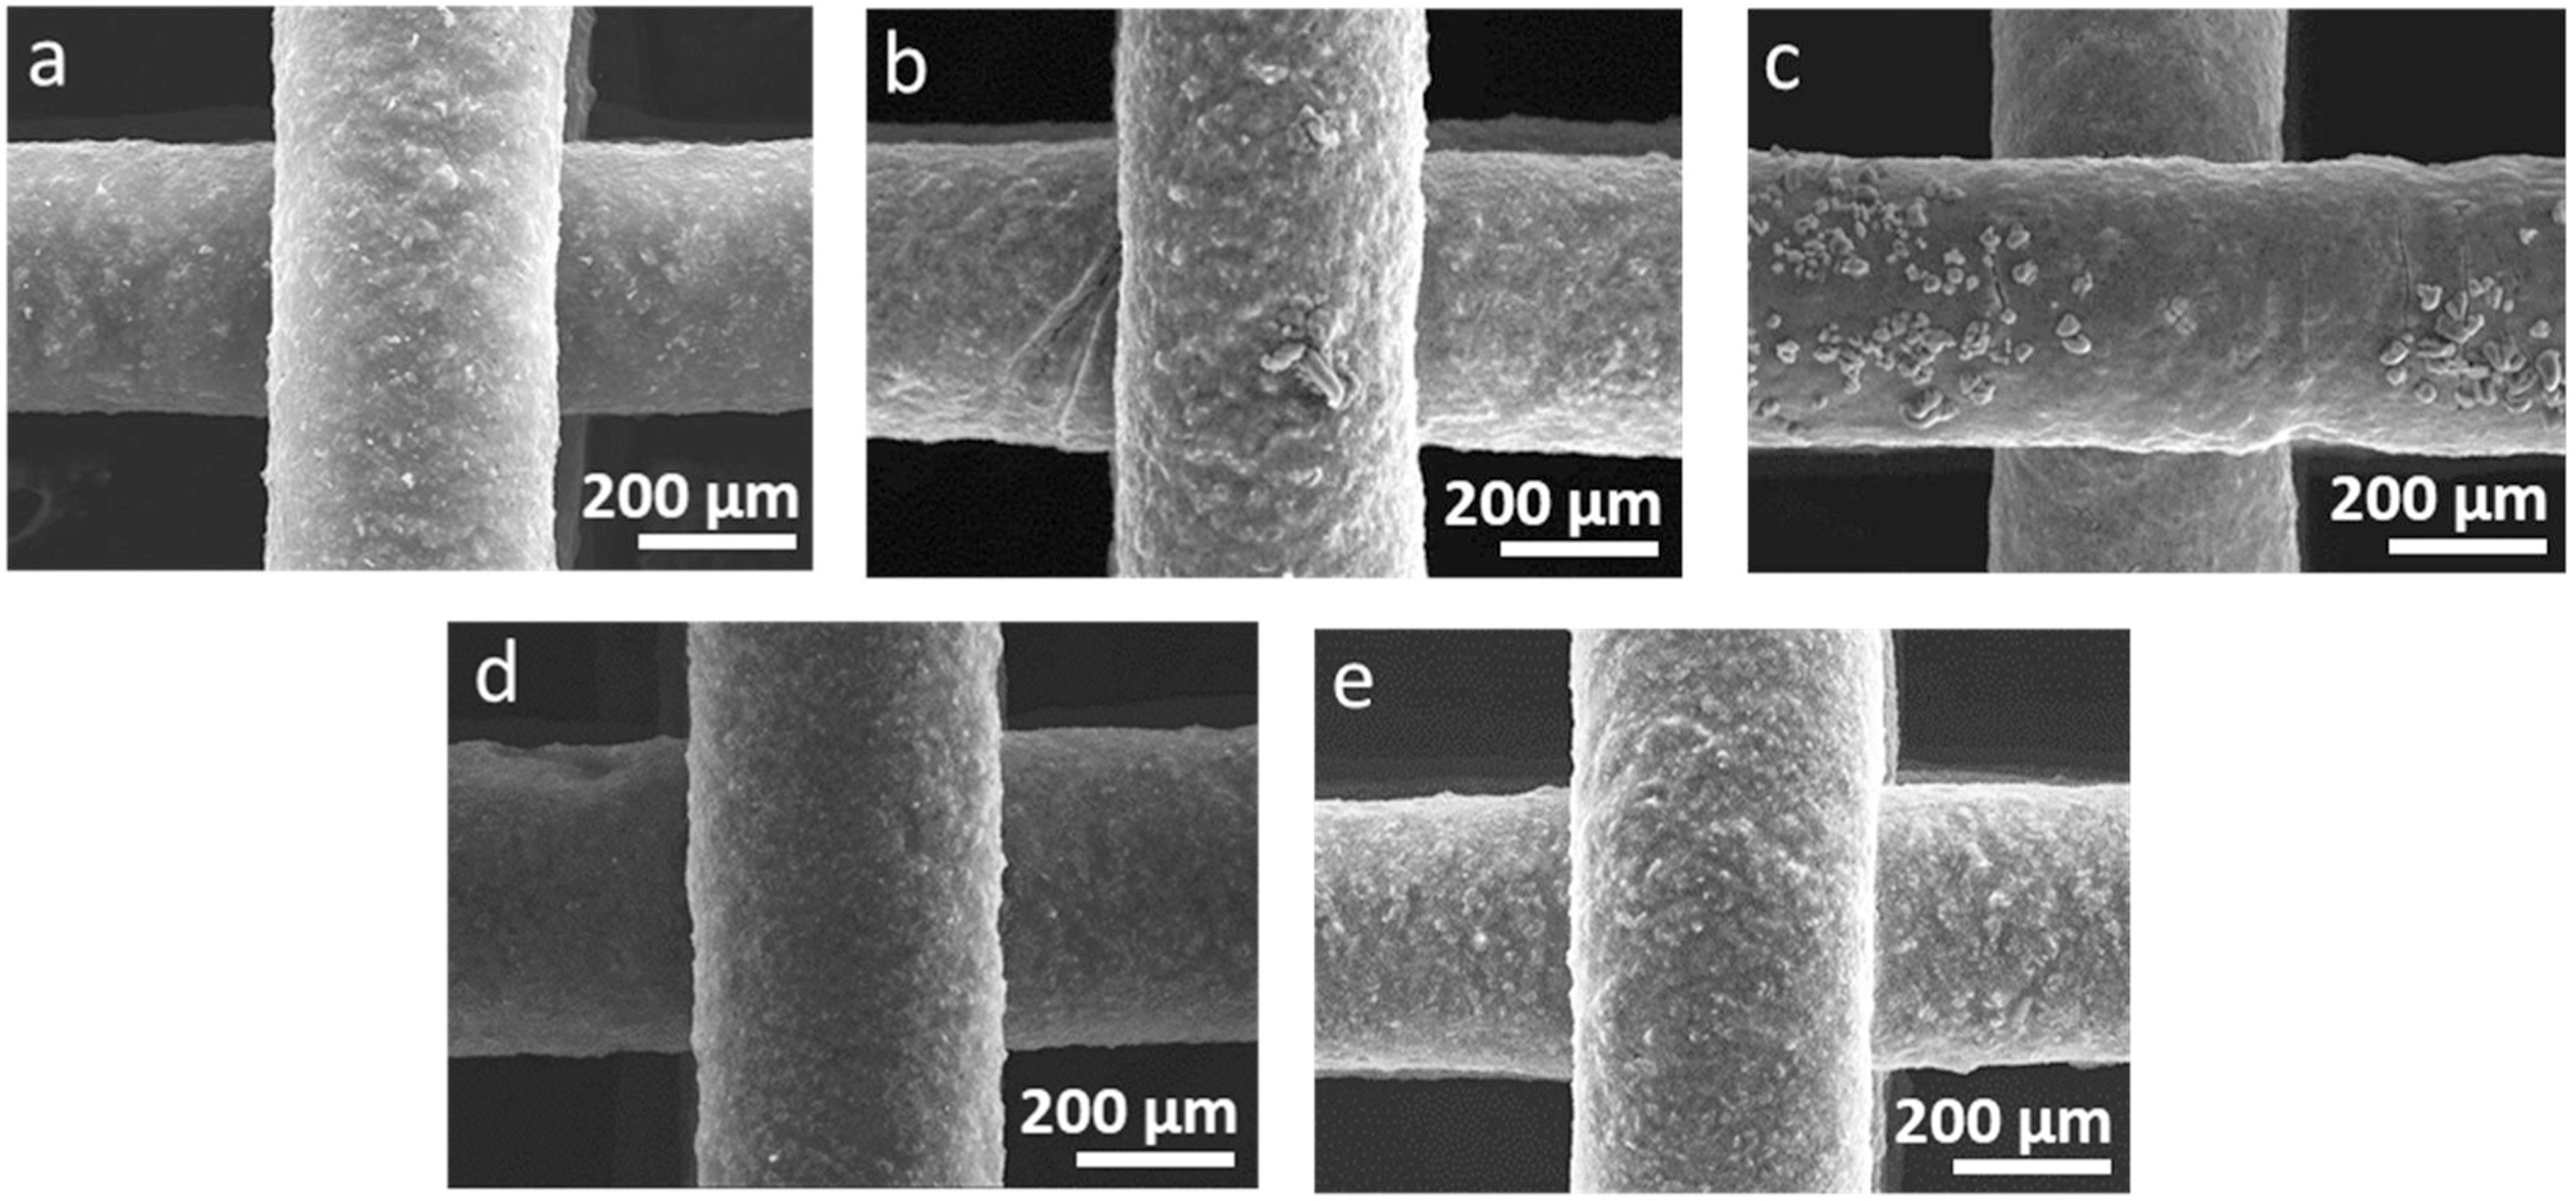 Comparing scanning electron microscope (SEM) images of the different materials. (a) the original graphene oxide scaffold, (b-e) graphene oxide-silica structures. Image via Journal of the European Ceramic Society.